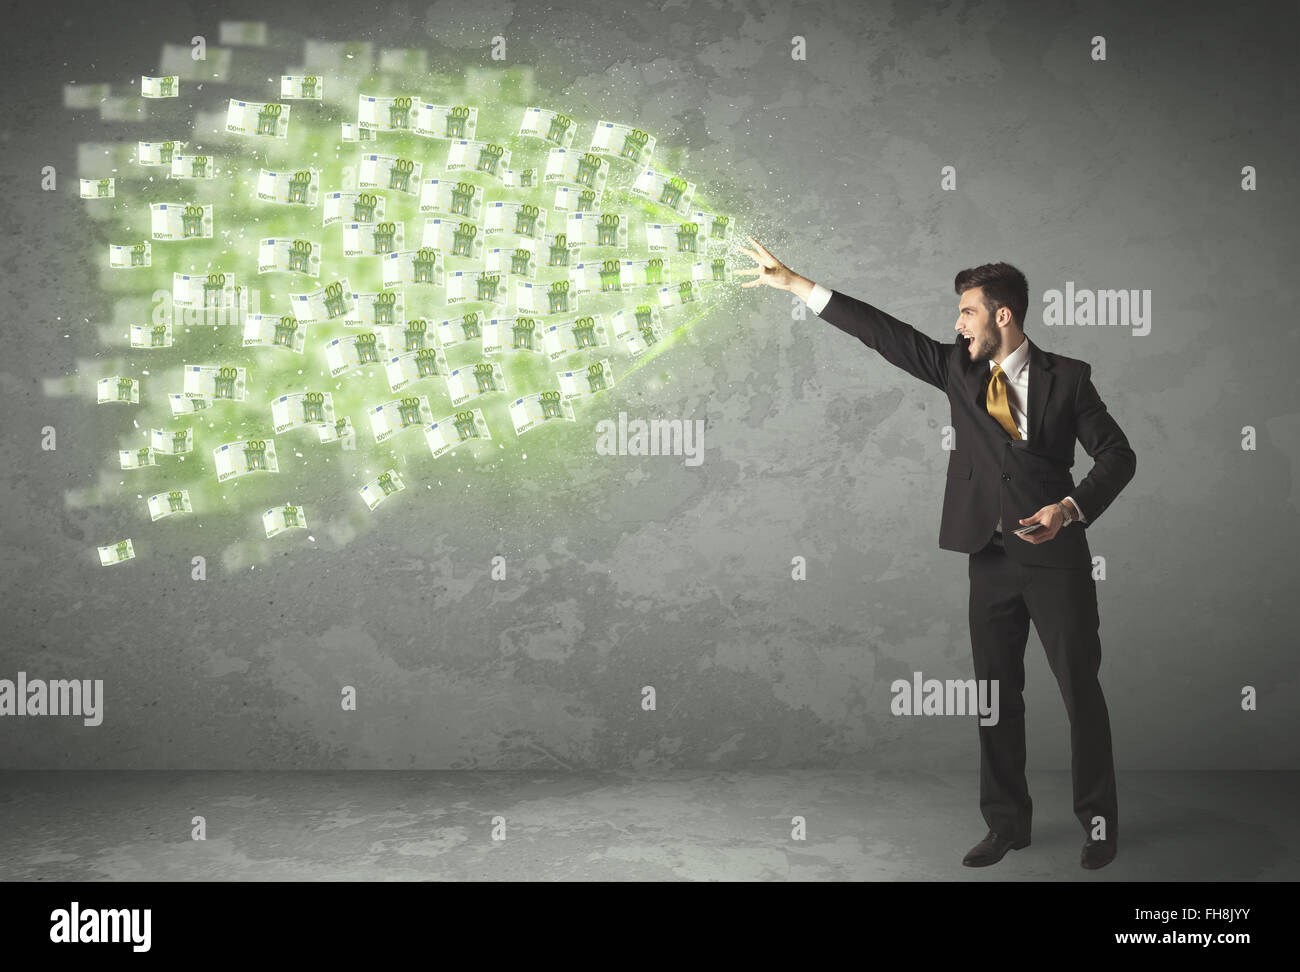 Young business person throwing money concept Stock Photo